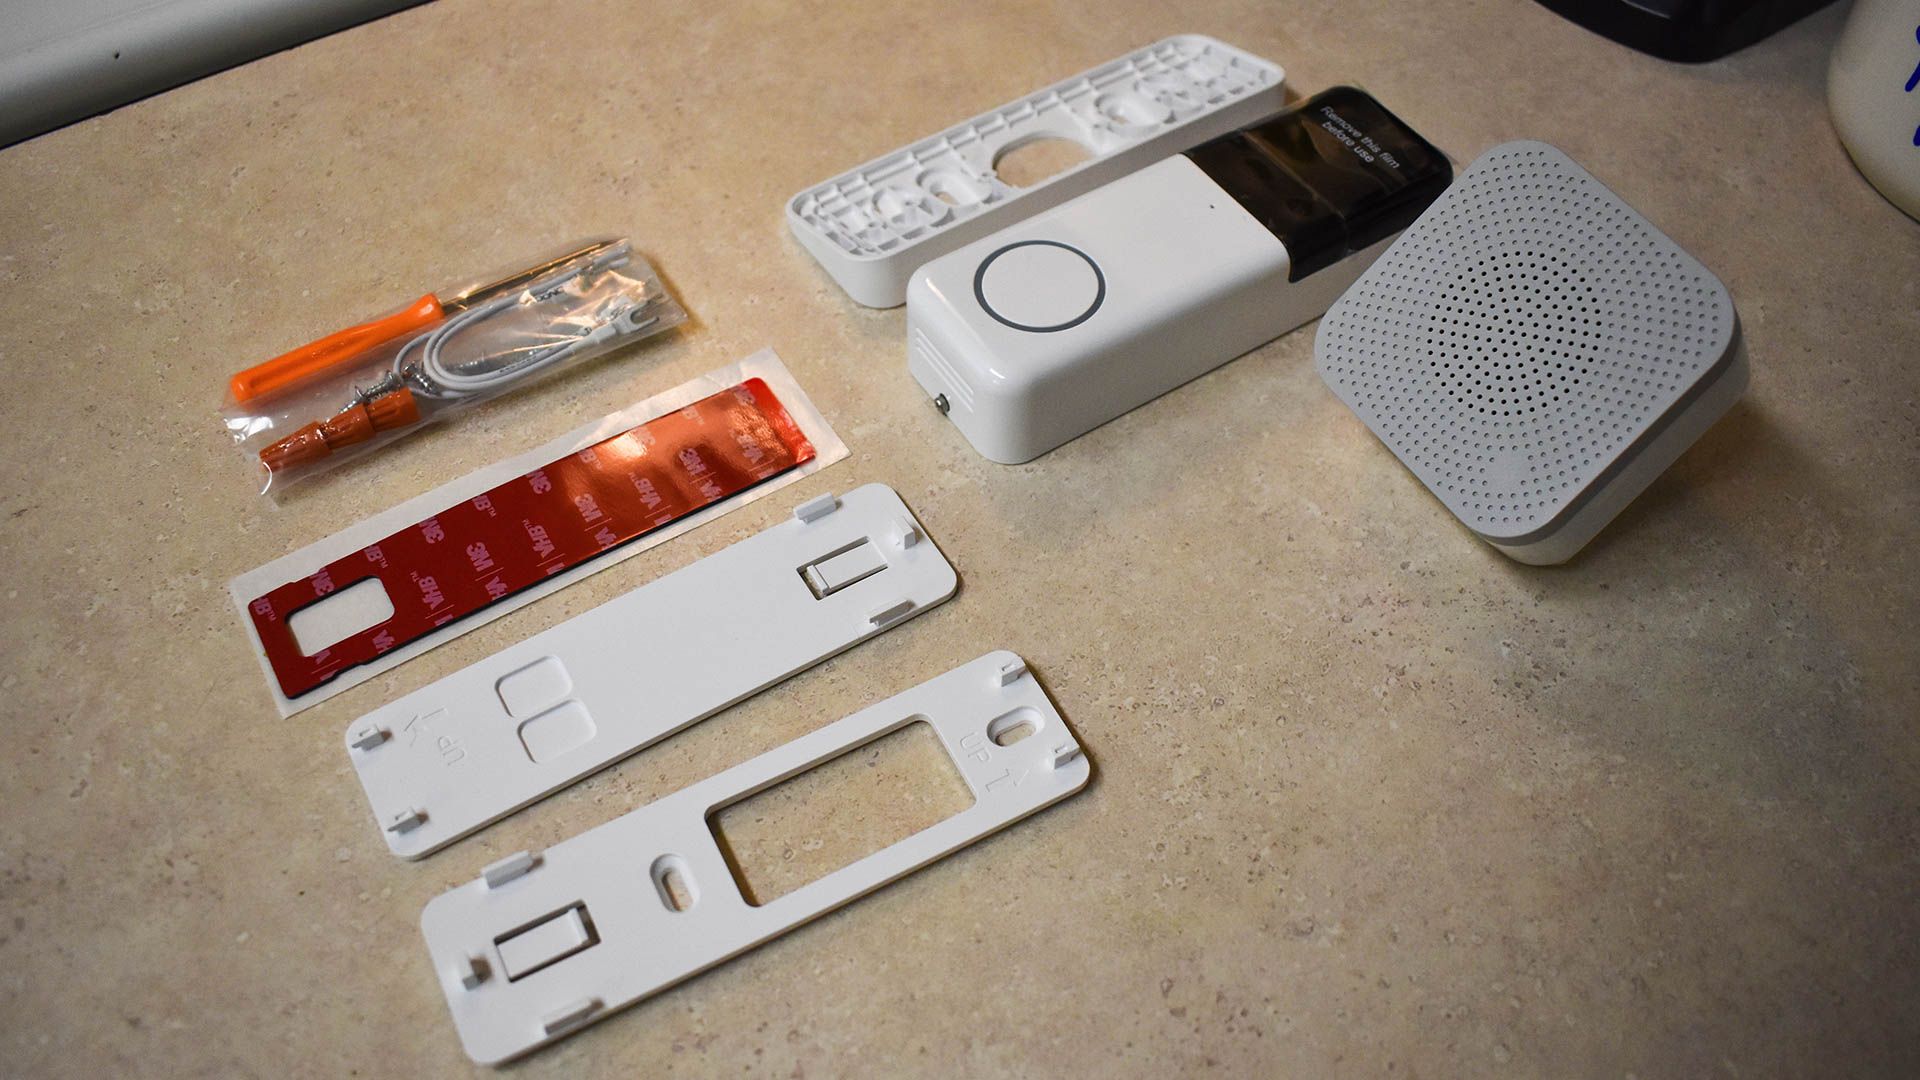 Everything included in the box- Wyze Doorbell Pro, Chime Pro, mounting plates, tools, and adhesive